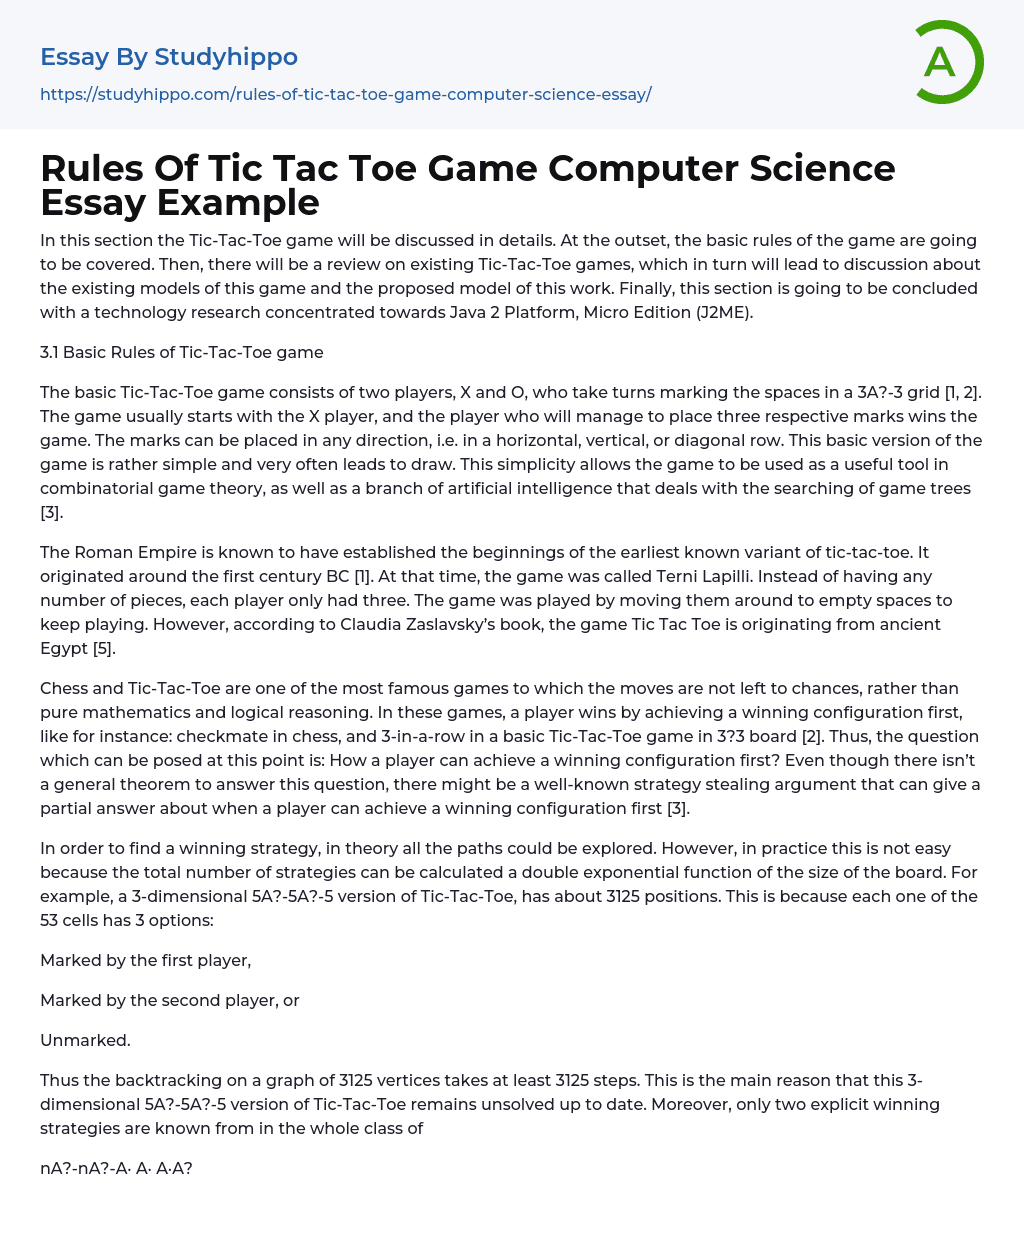 Rules Of Tic Tac Toe Game Computer Science Essay Example